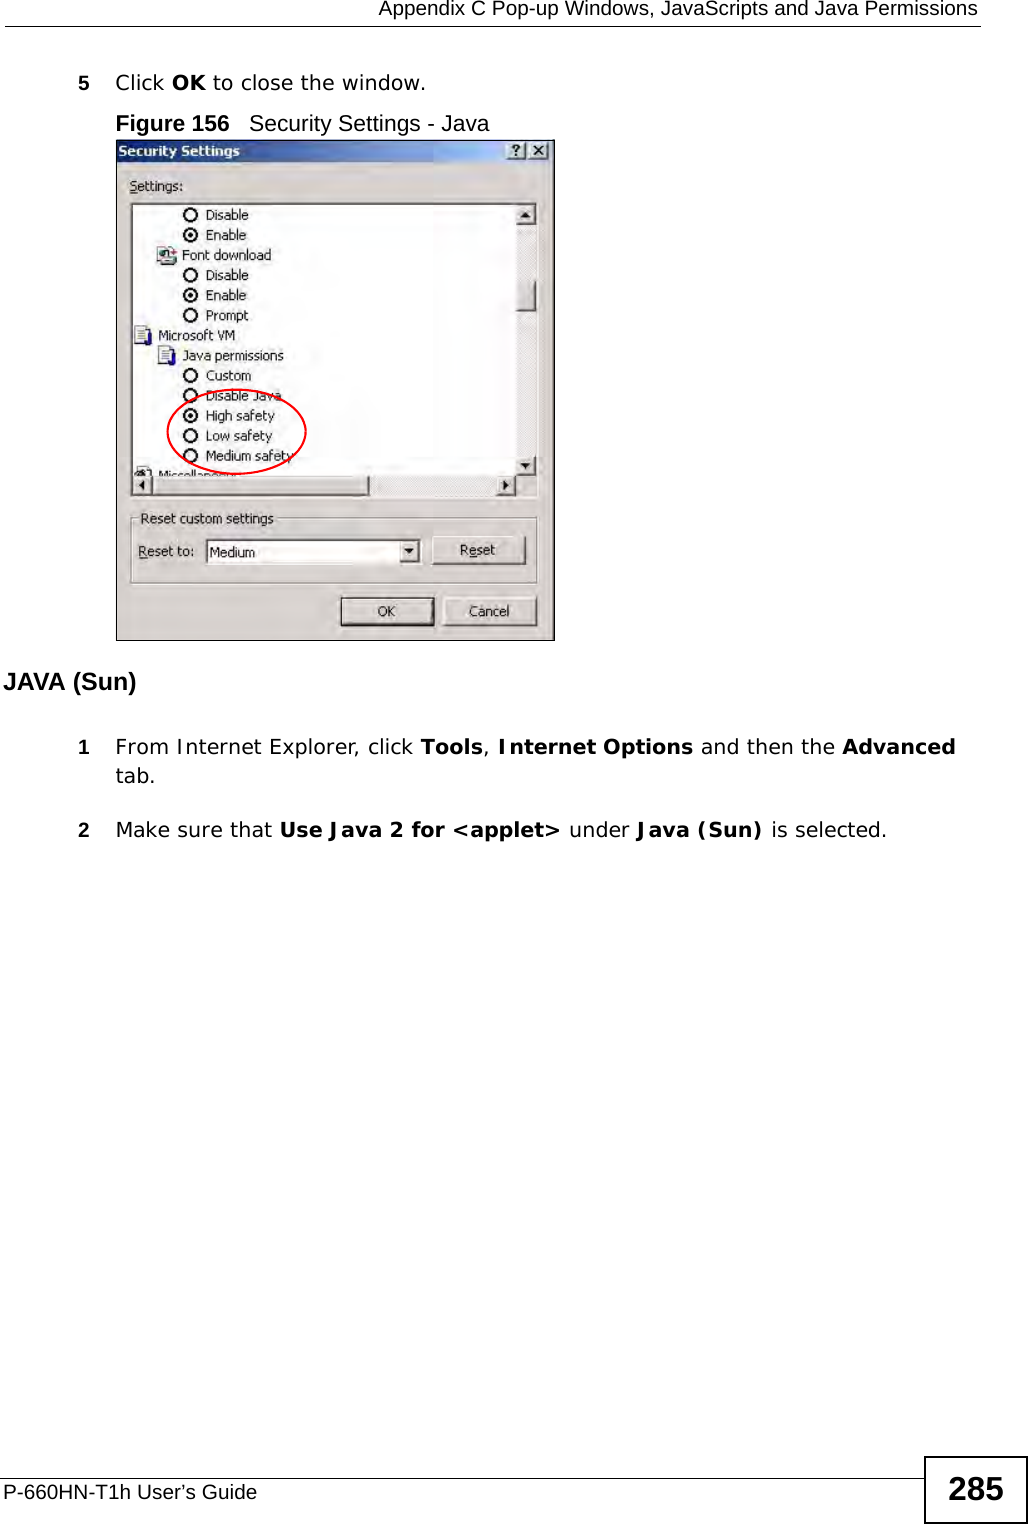  Appendix C Pop-up Windows, JavaScripts and Java PermissionsP-660HN-T1h User’s Guide 2855Click OK to close the window.Figure 156   Security Settings - Java JAVA (Sun)1From Internet Explorer, click Tools, Internet Options and then the Advanced tab. 2Make sure that Use Java 2 for &lt;applet&gt; under Java (Sun) is selected.